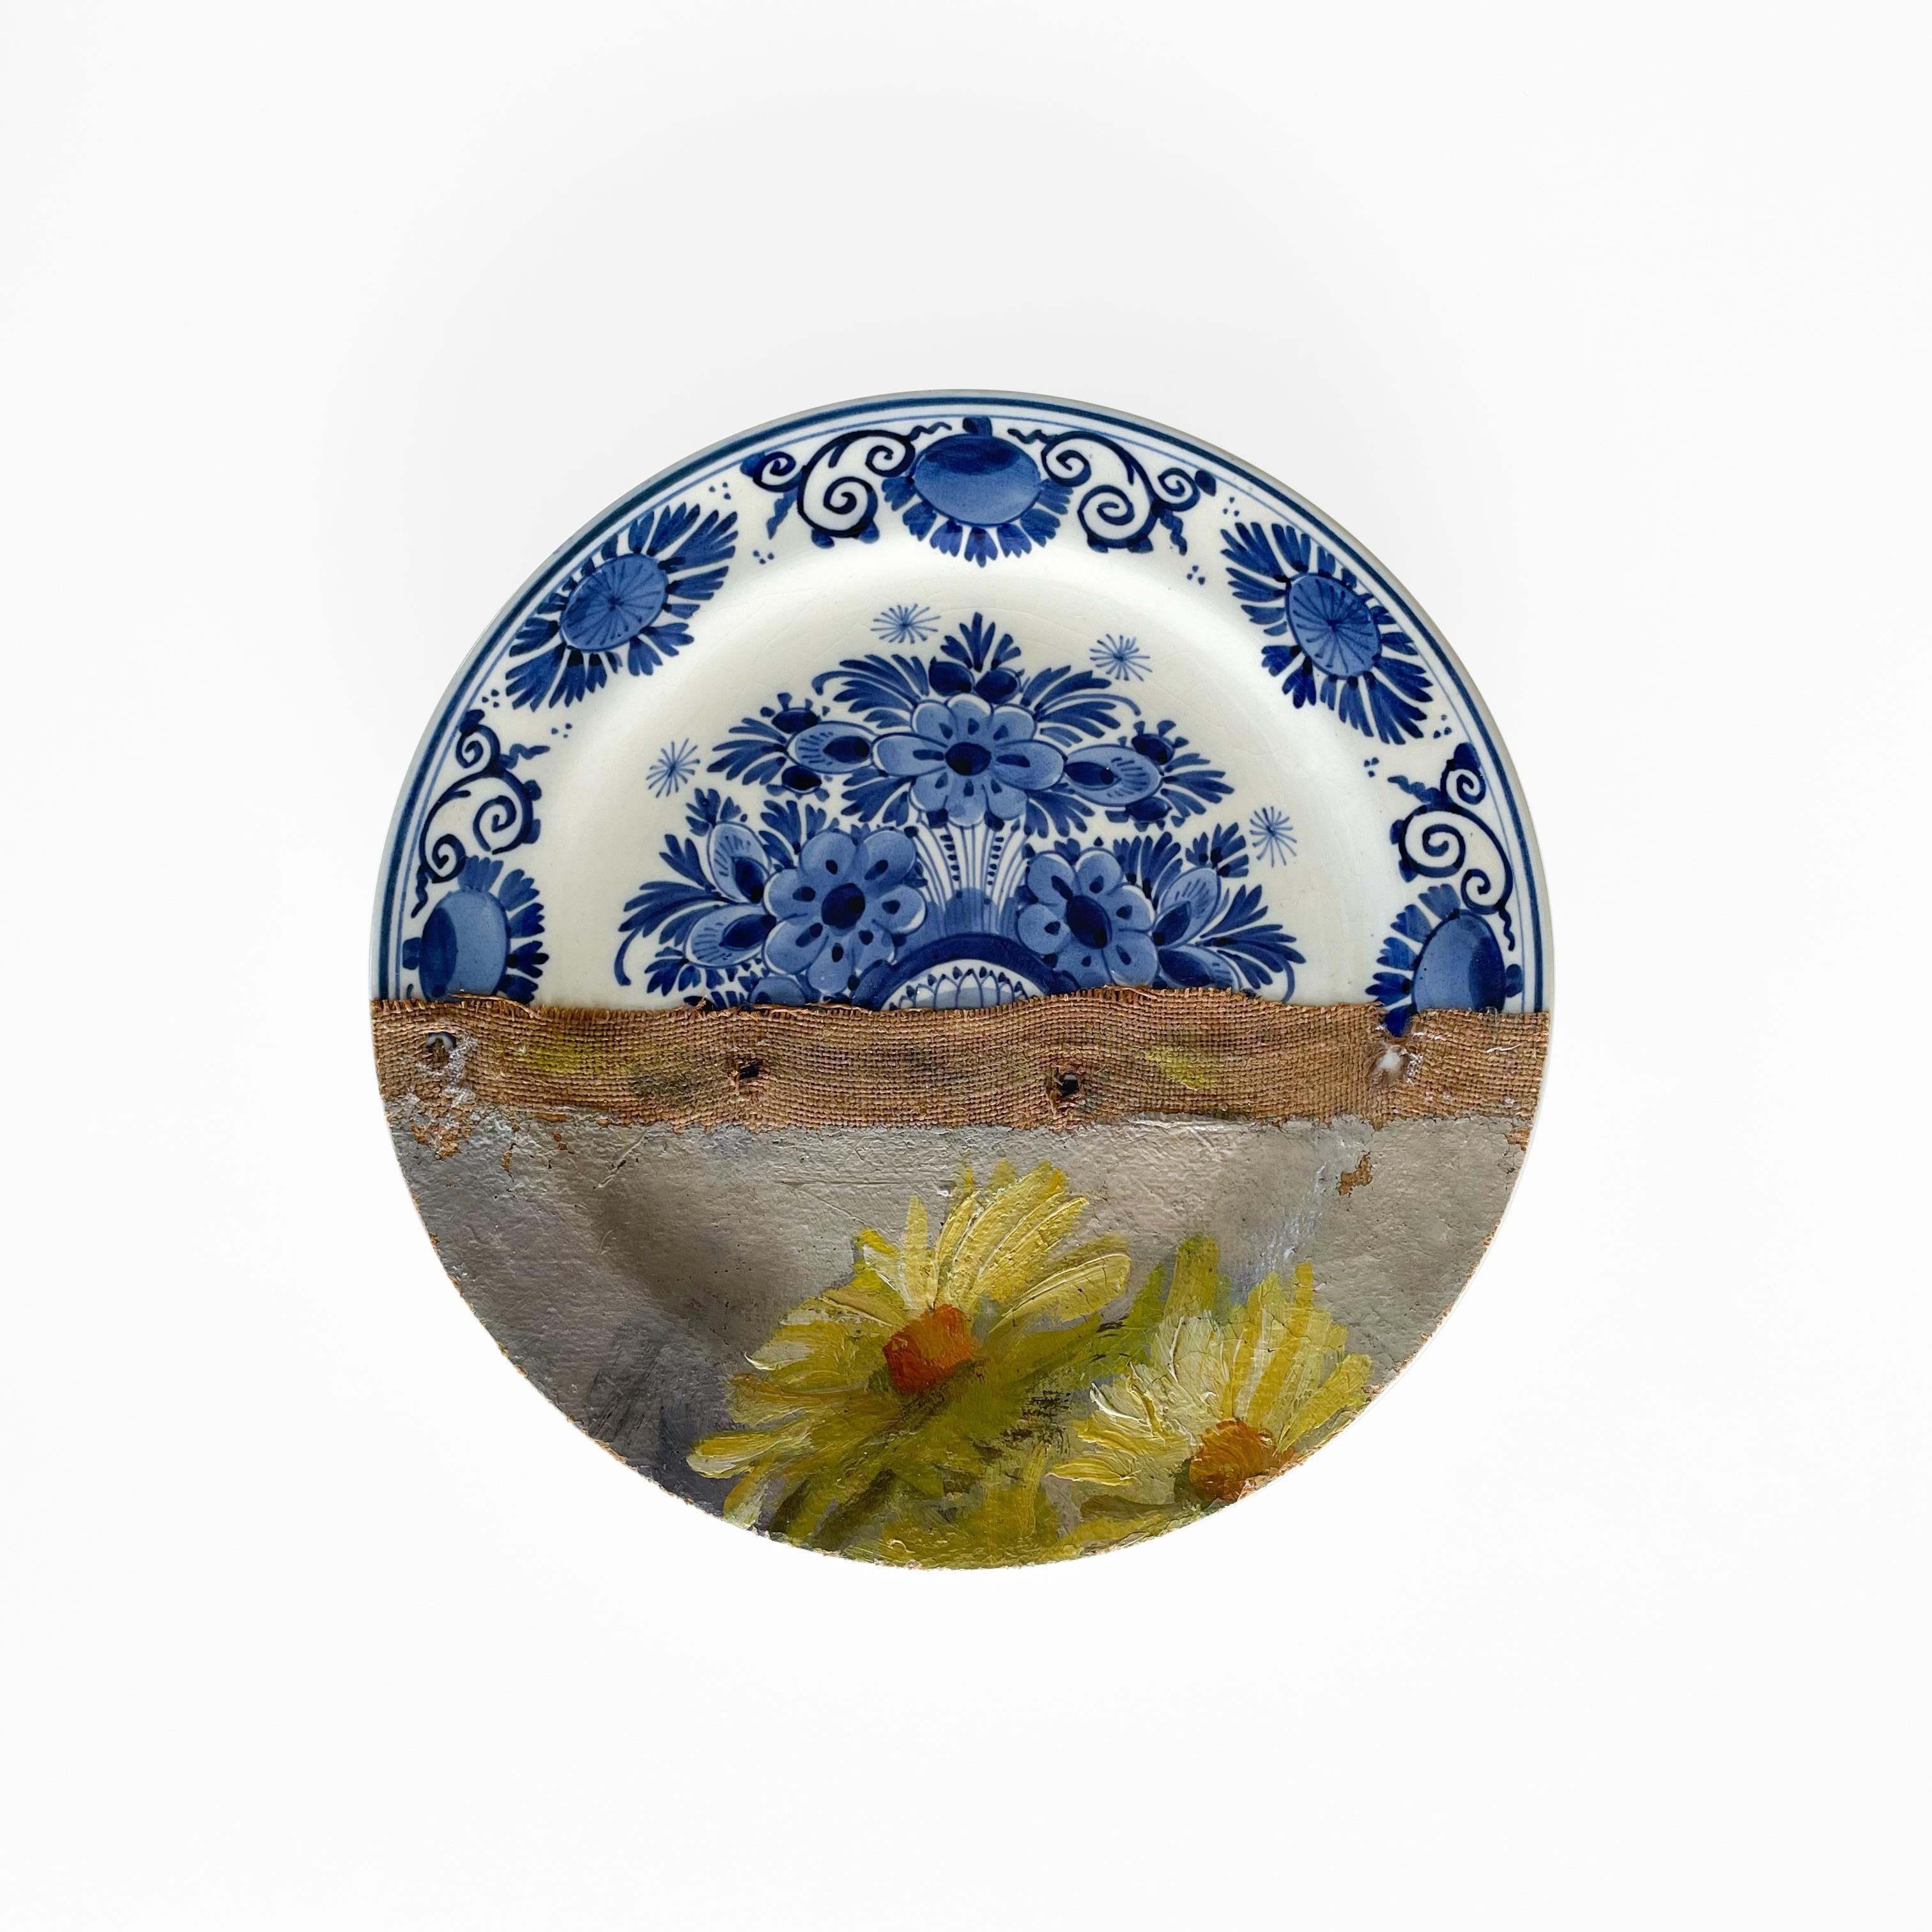 “La Ciotat” belongs to our “Altered Perspectives” series: assemblages of ceramic plates layered with a painting on canvas.
This artwork includes 5 South-East Asian plates combined with a painting on canvas featuring a sunny view of the French